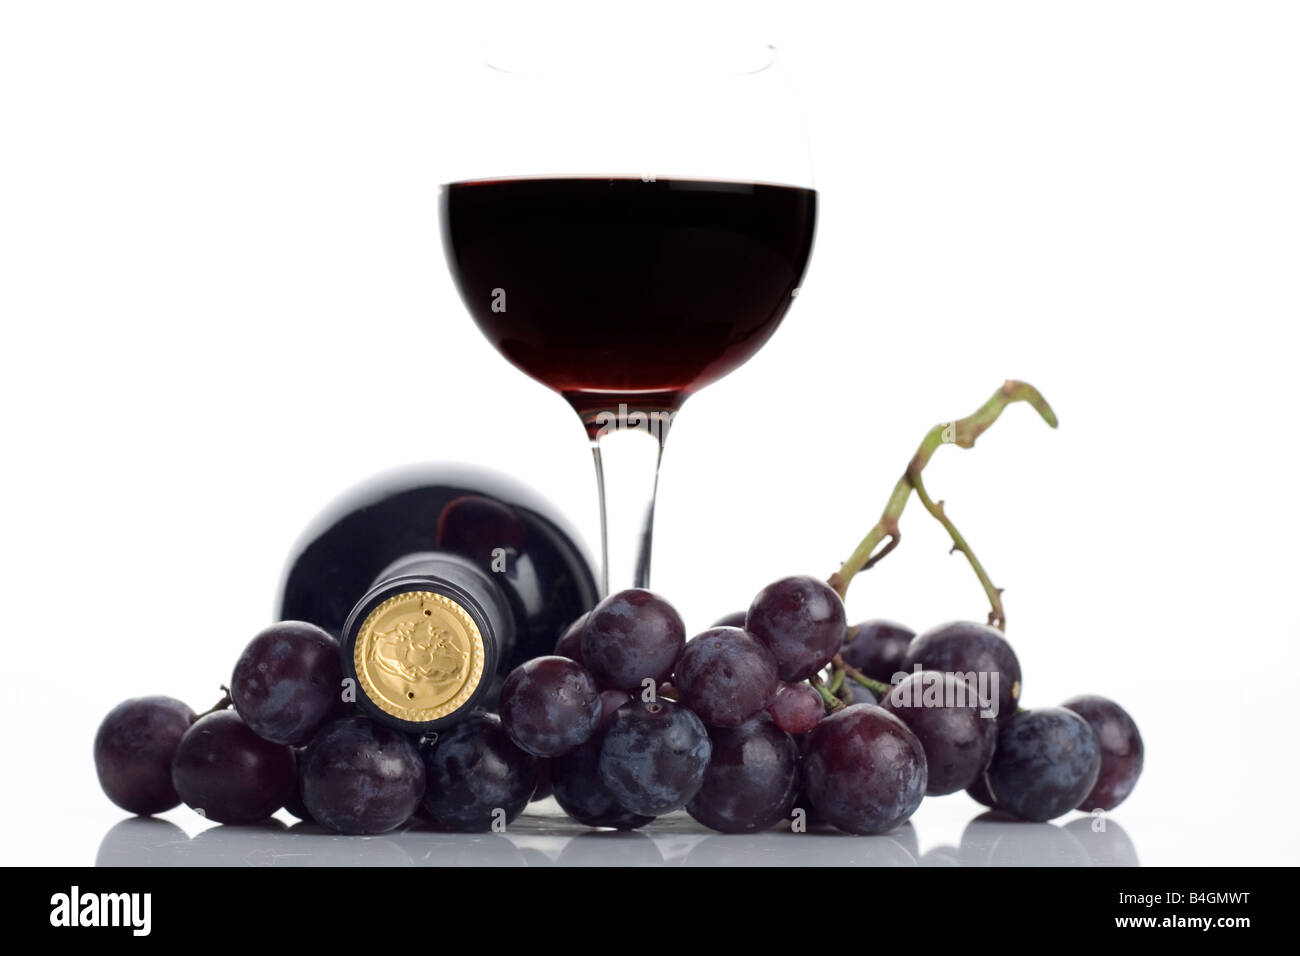 Red wine glass with grapes Stock Photo